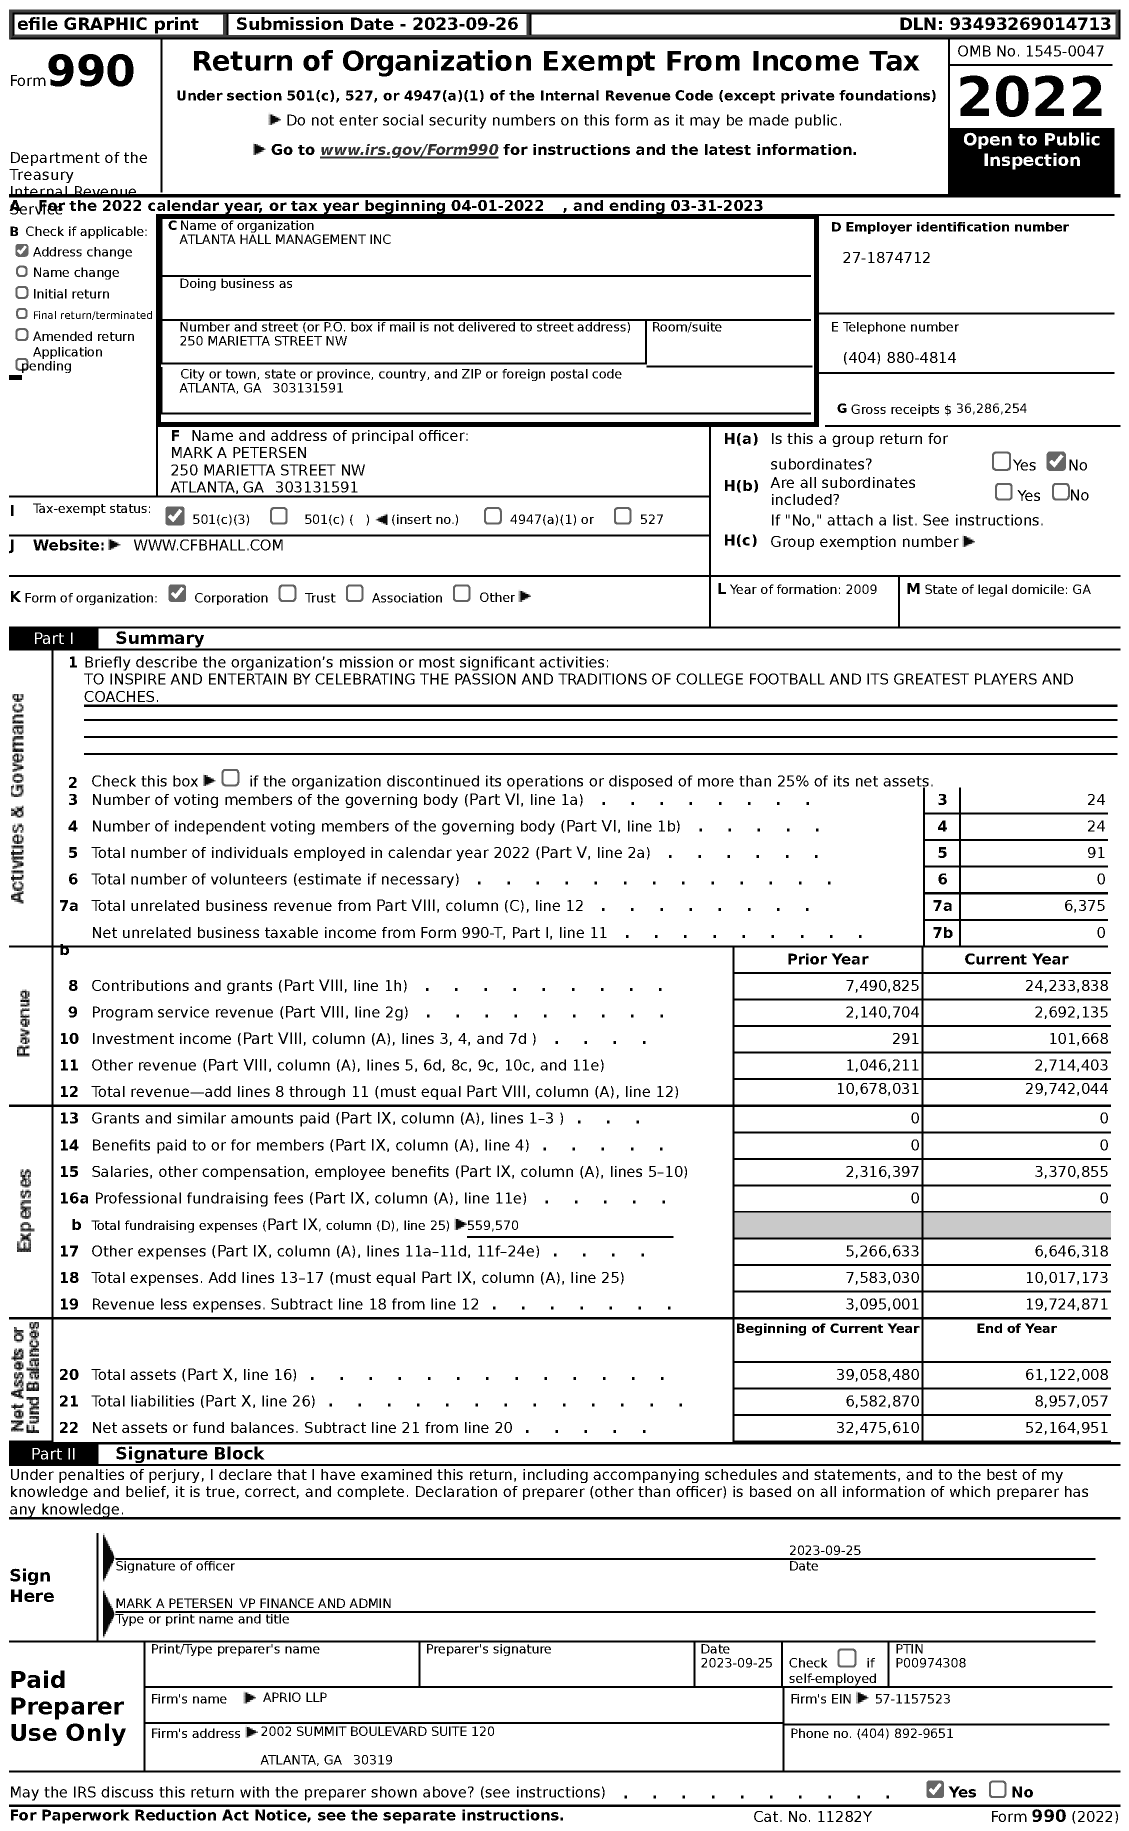 Image of first page of 2022 Form 990 for Atlanta Hall Management